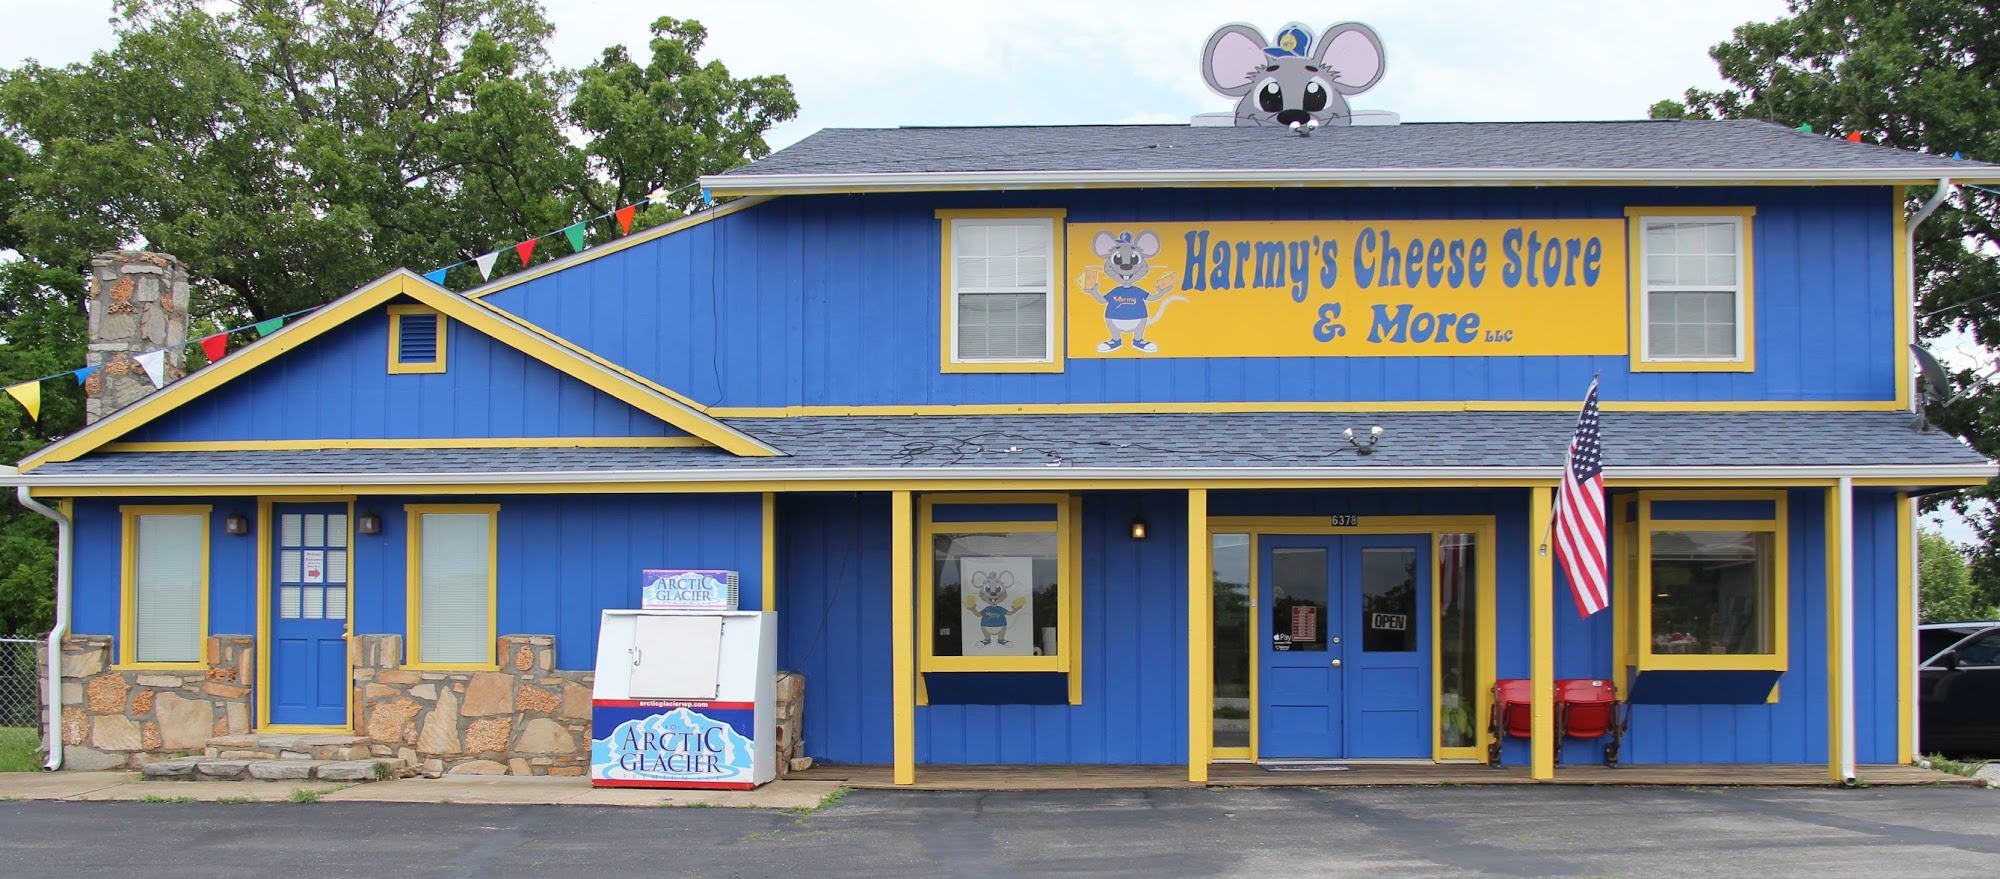 Harmy's Cheese Store & More, LLC